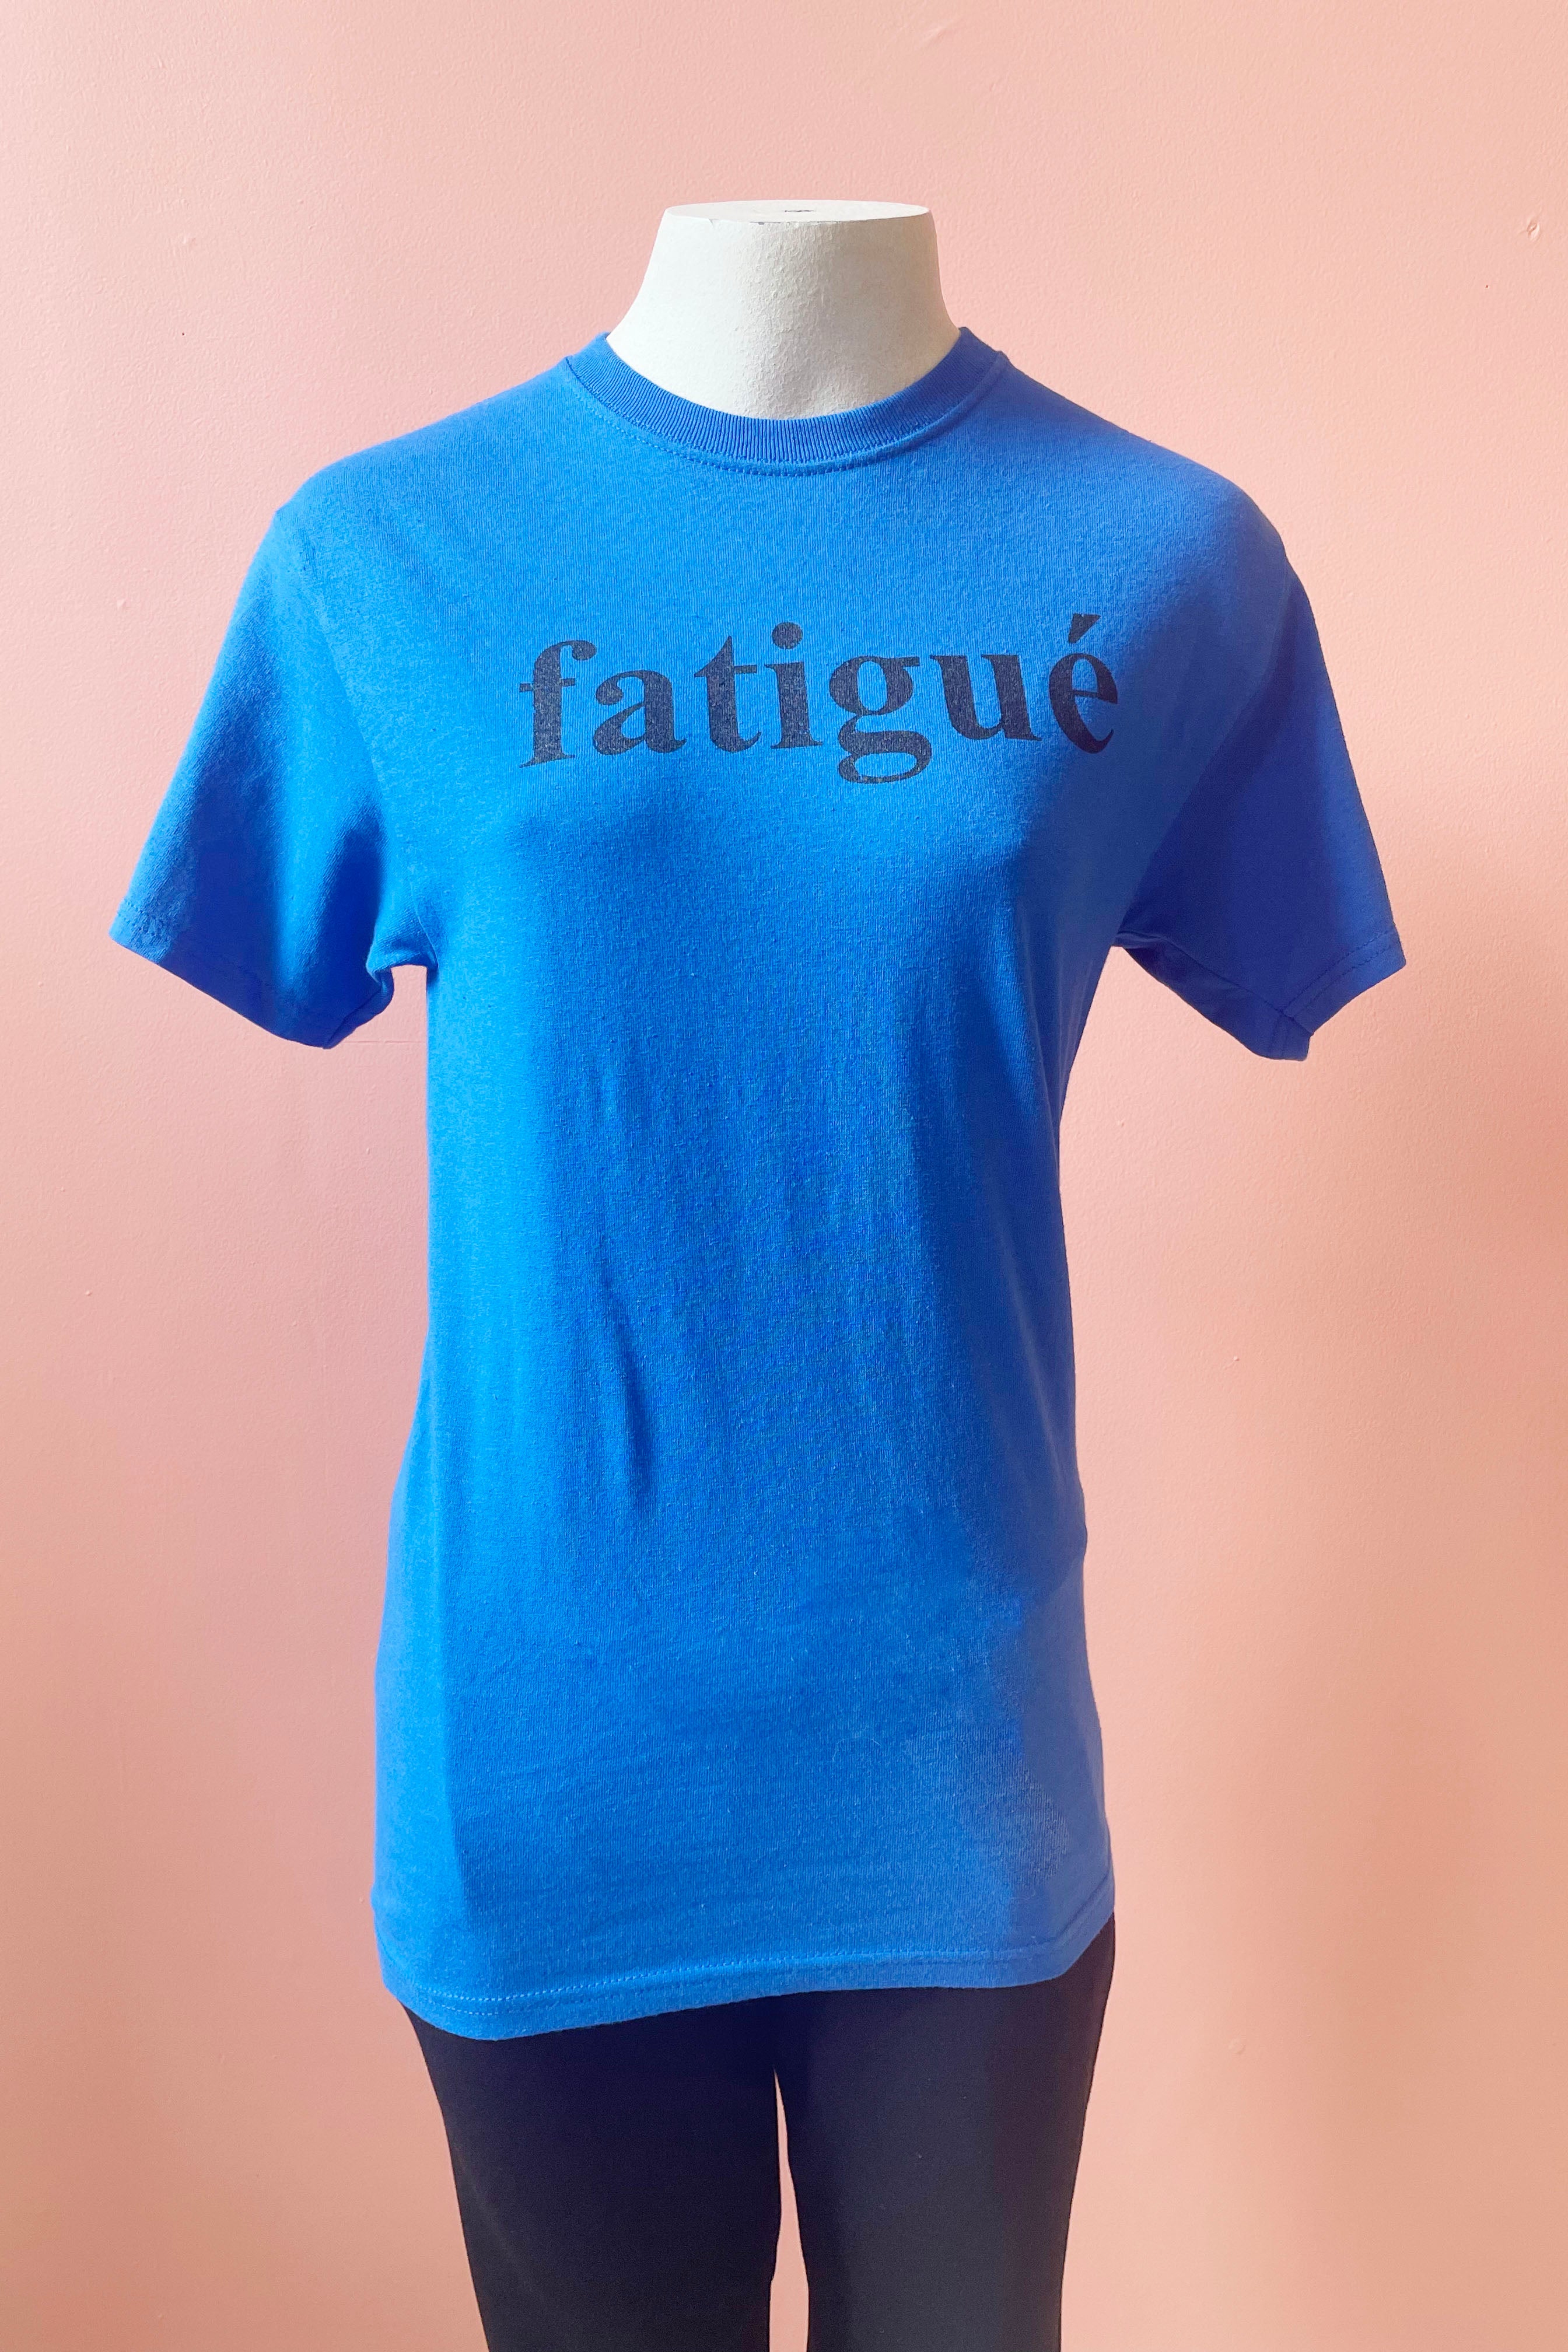 Fatigue Tee by Sara Duke, Blue, classic t-shirt with the word Fatigue printed on the front, 100% cotton, sizes S to XL, made in Toronto